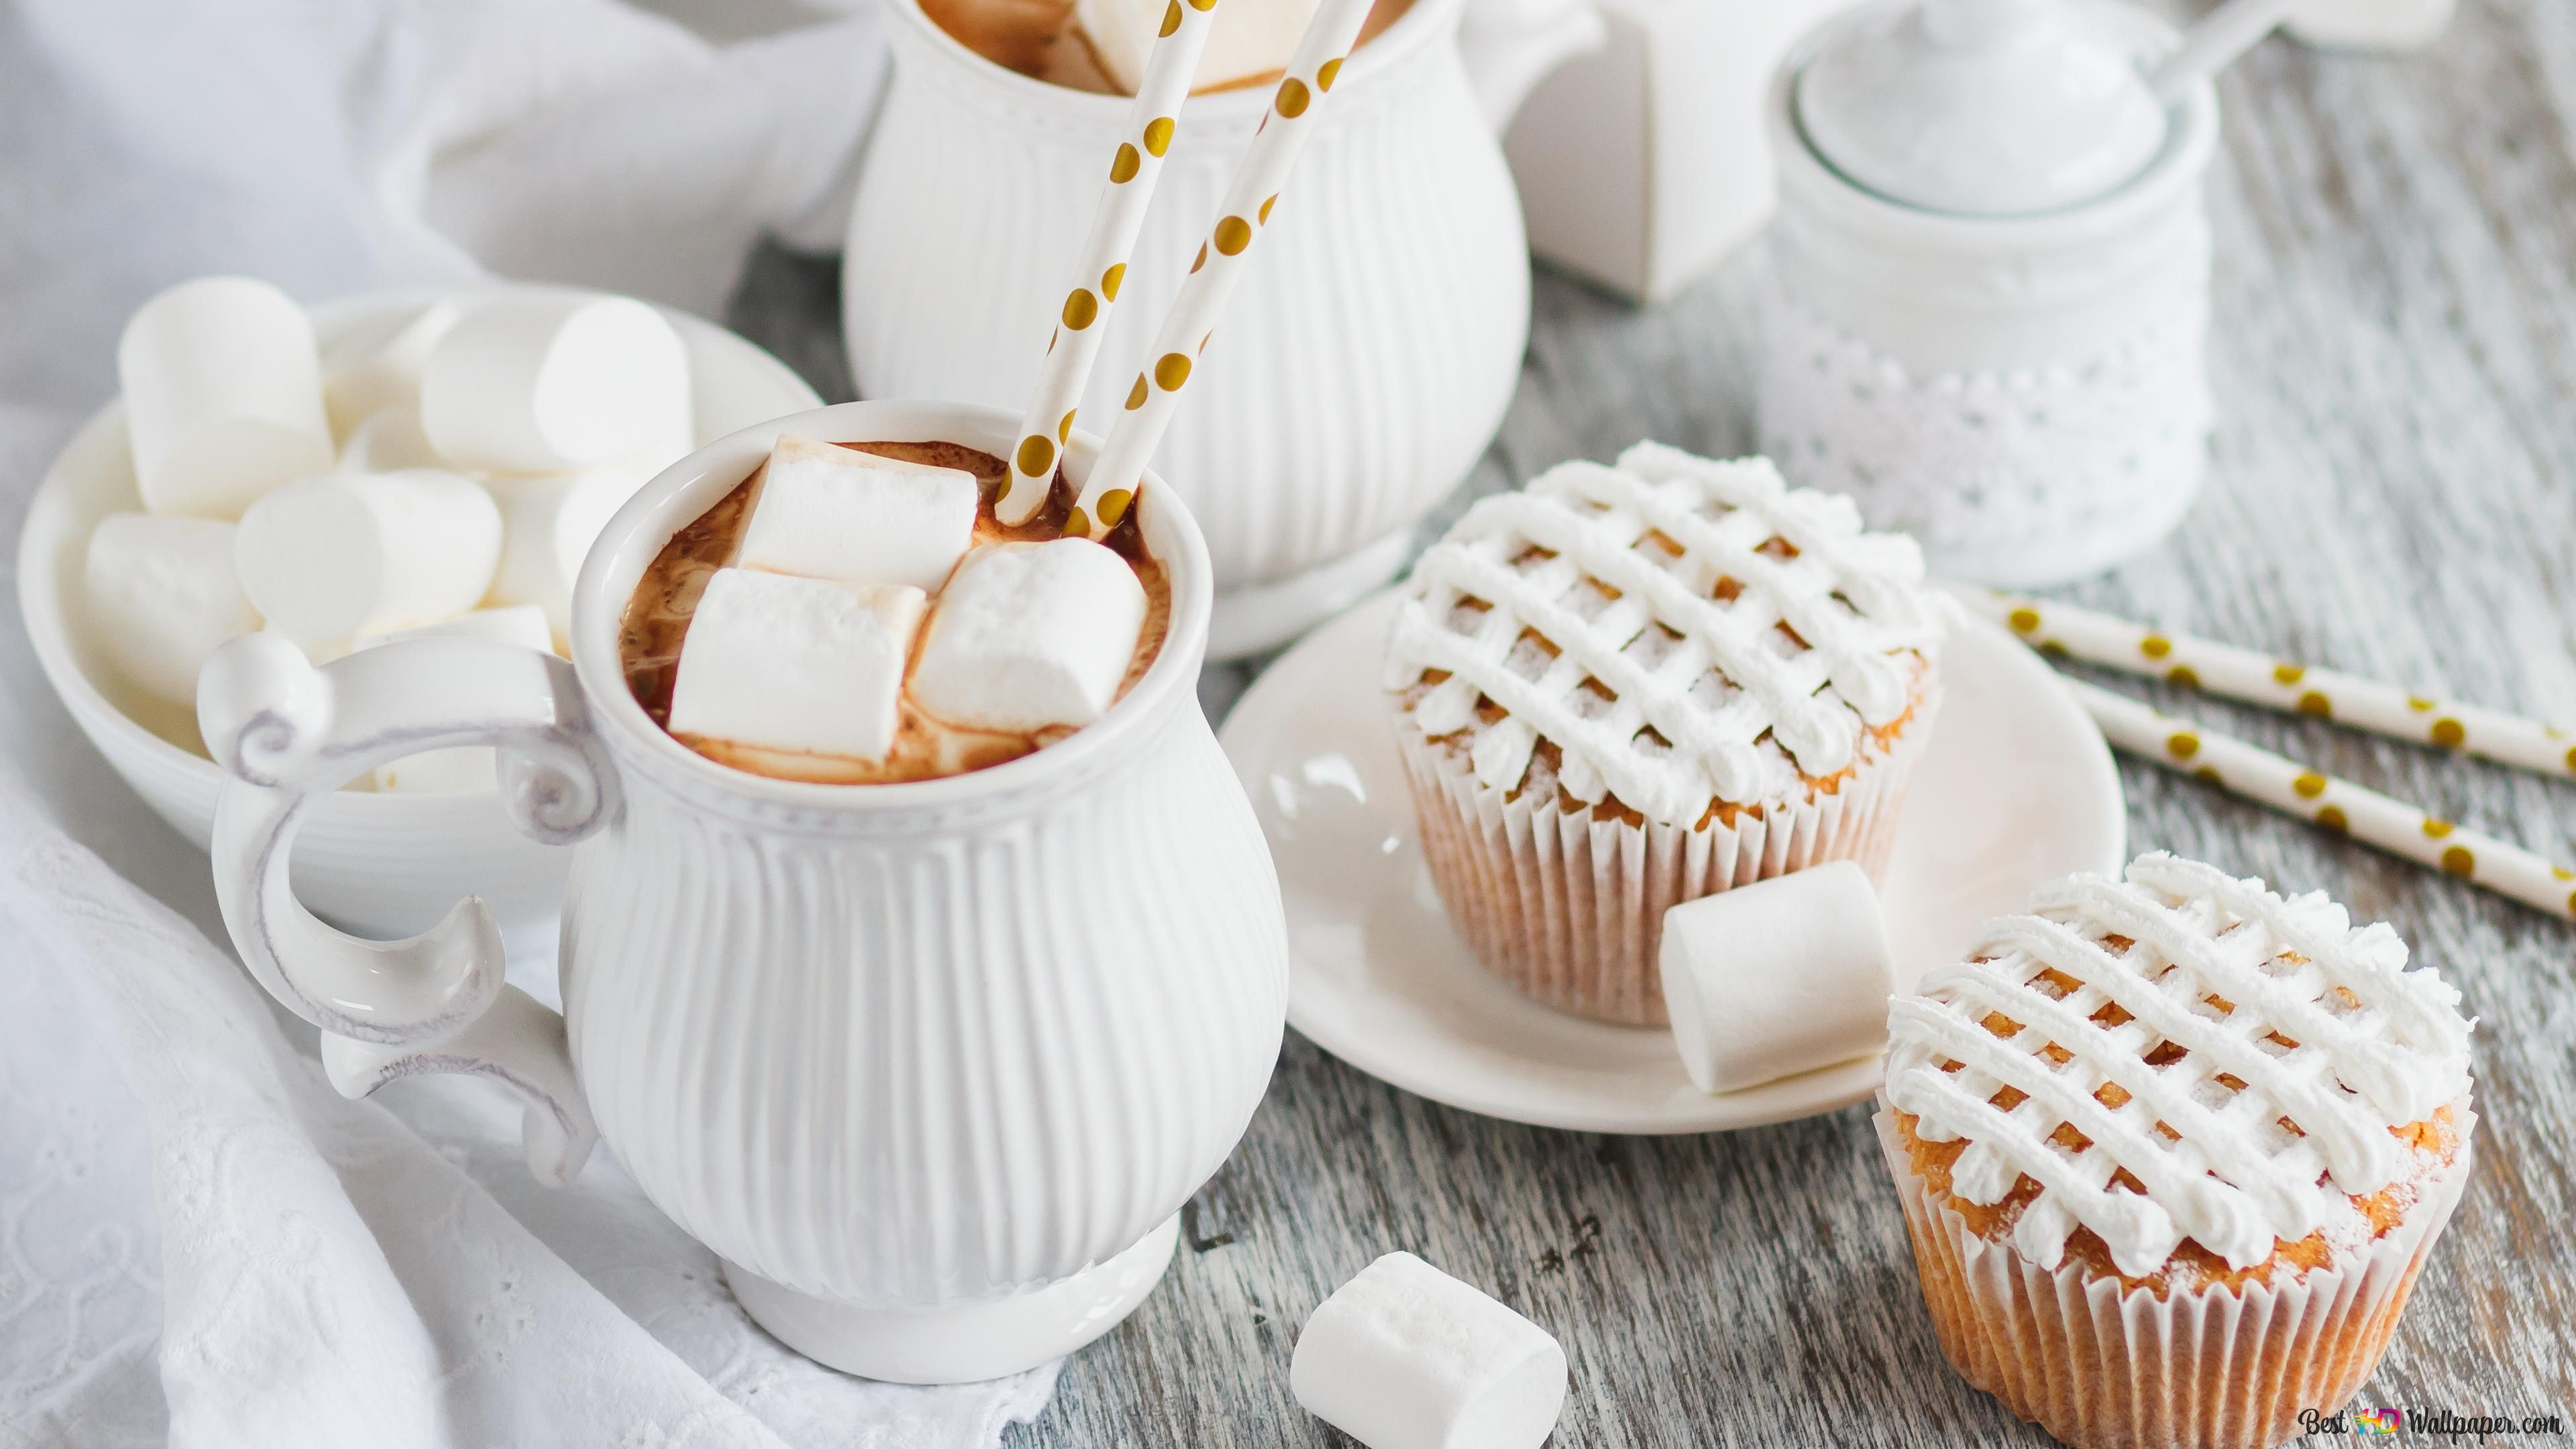 A cup of hot chocolate with marshmallows, a cupcake and a teapot - Marshmallows